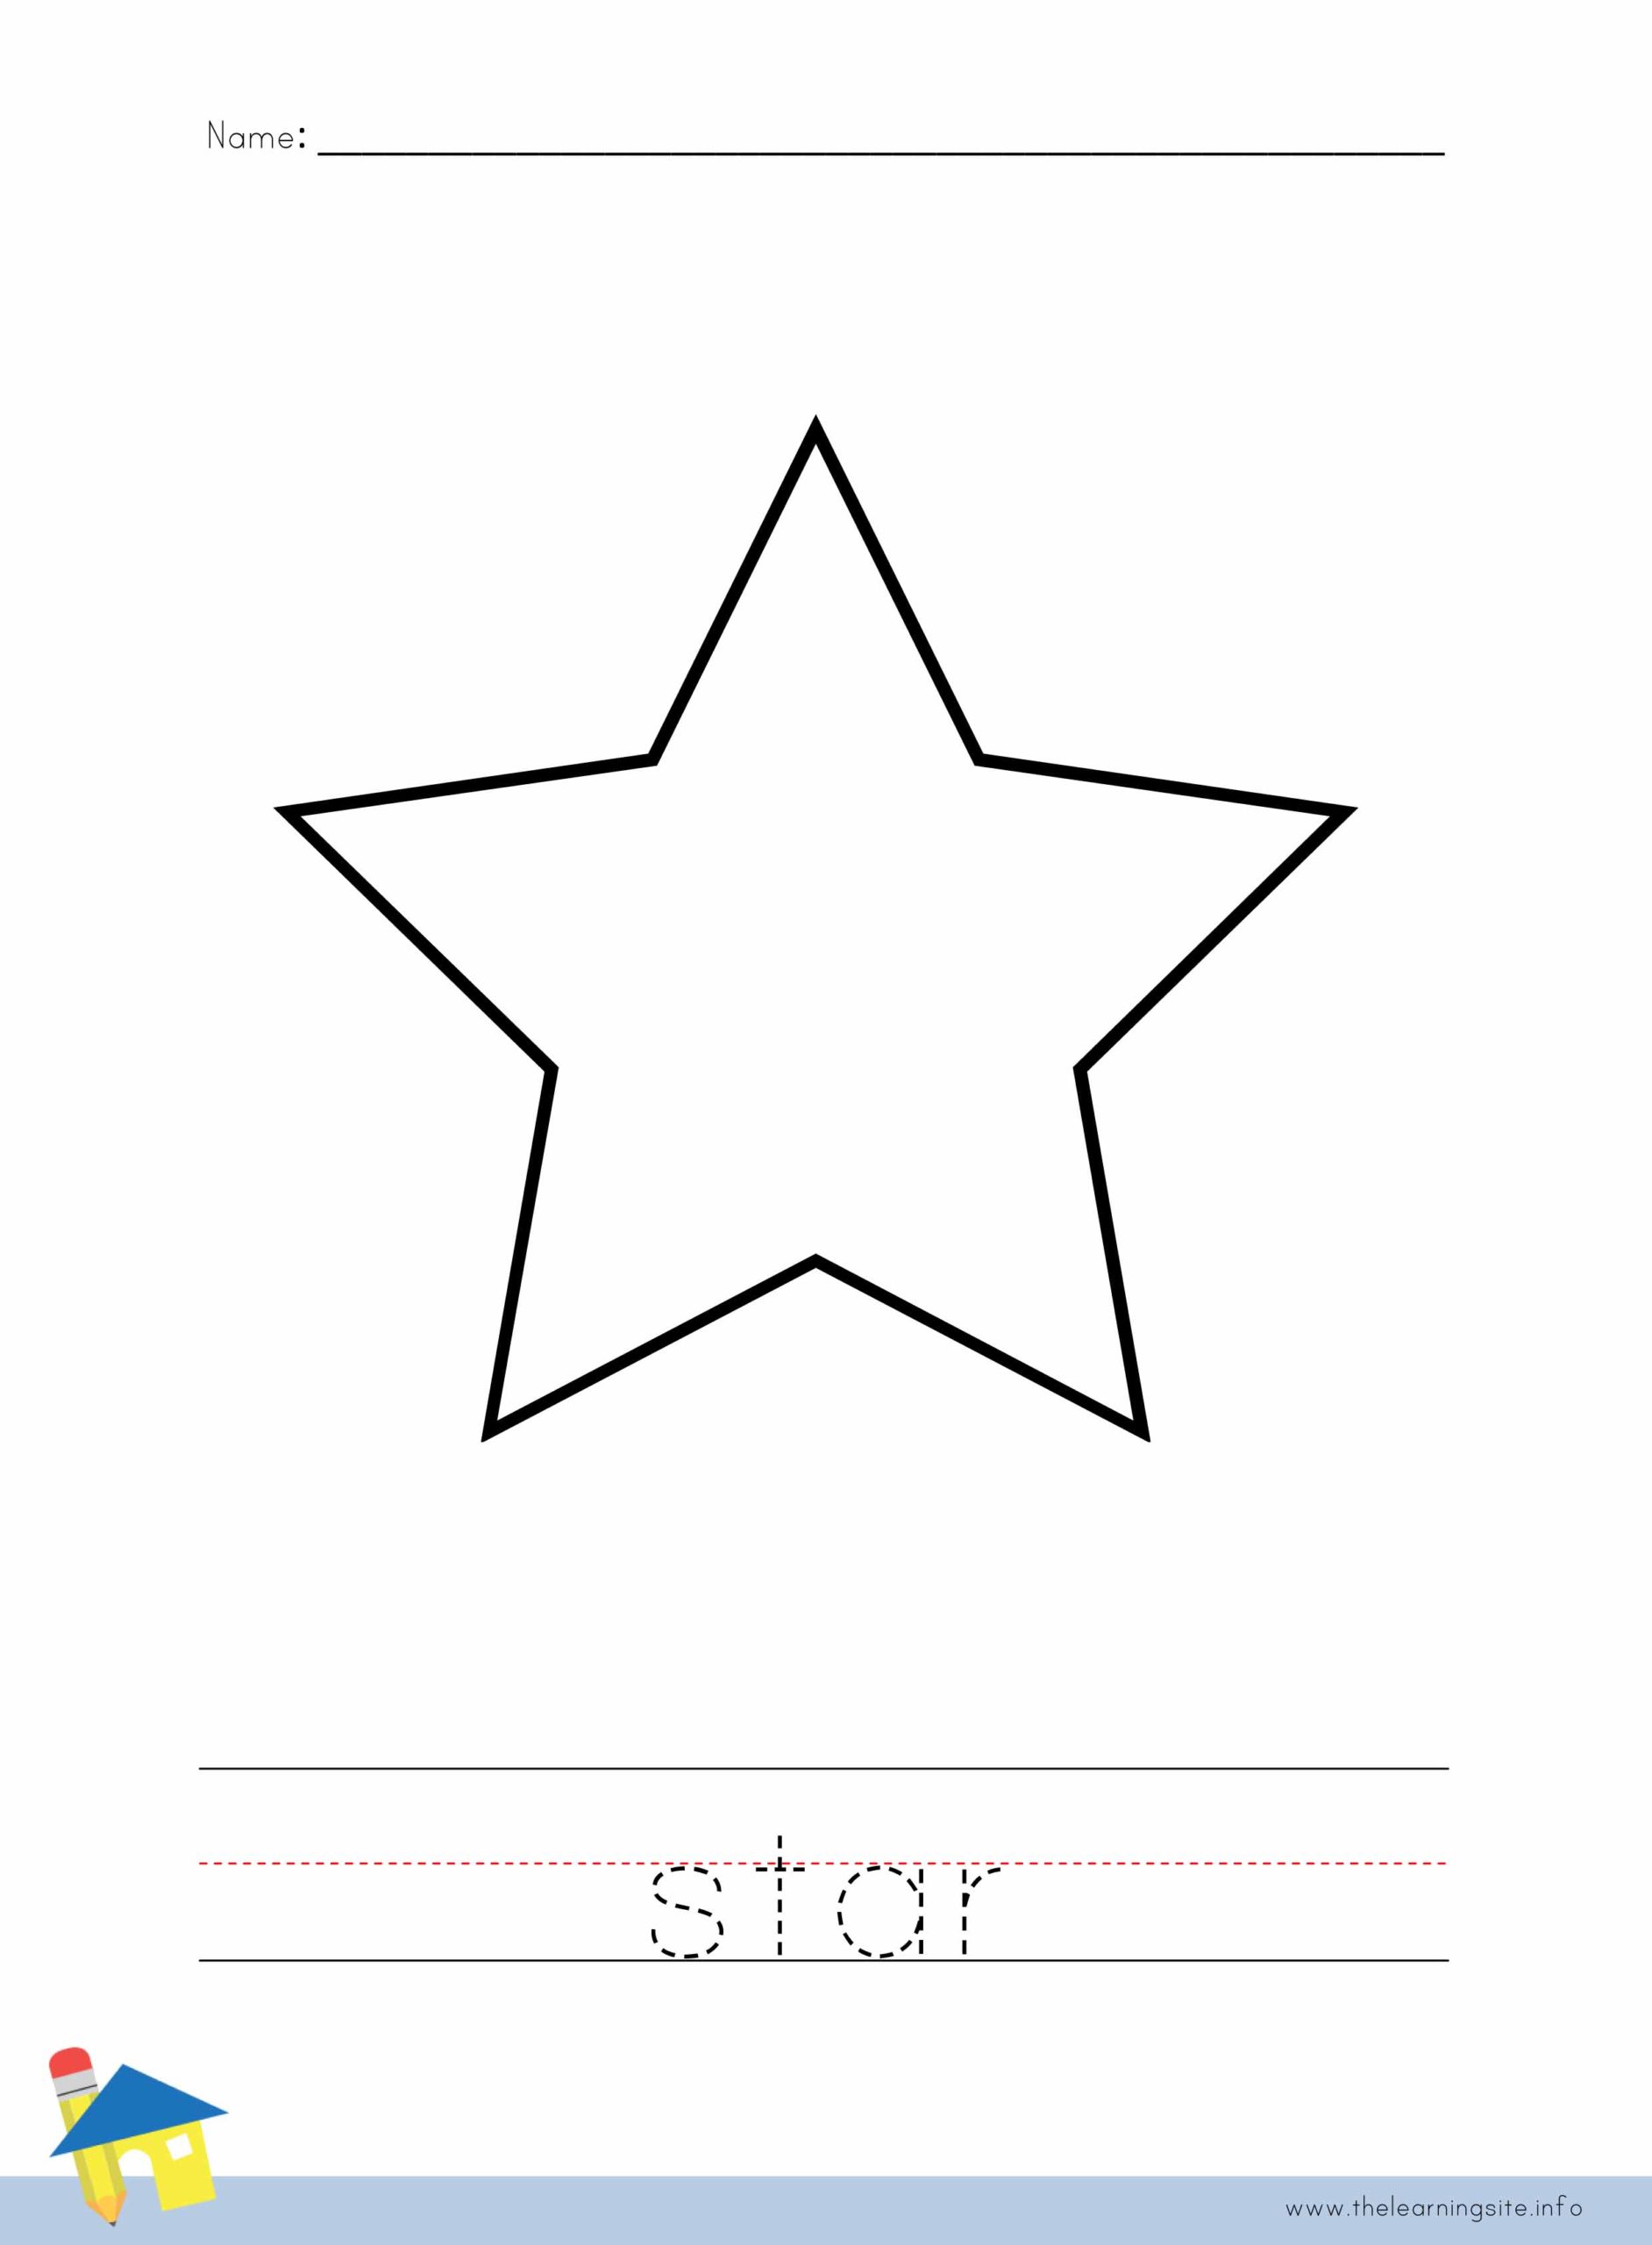 star-coloring-worksheet-the-learning-site